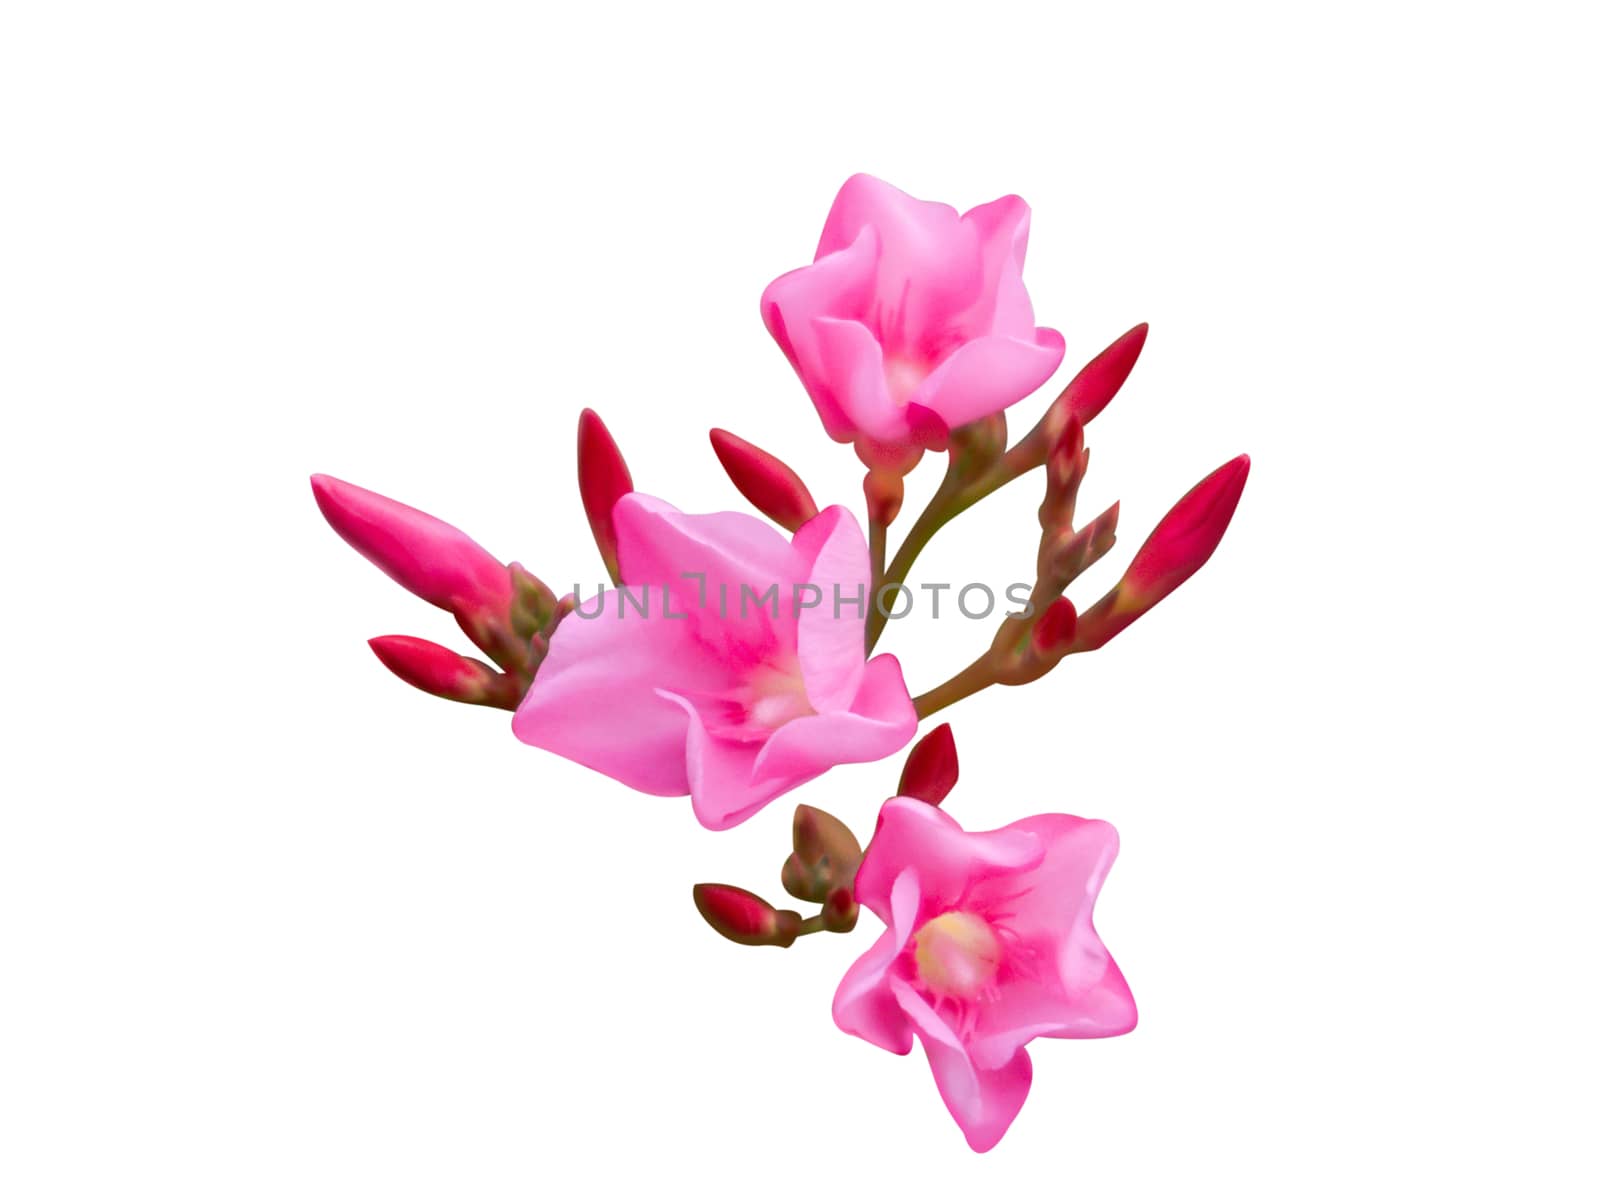 Closeup Plumeria pink color on white background for spa relax by pt.pongsak@gmail.com